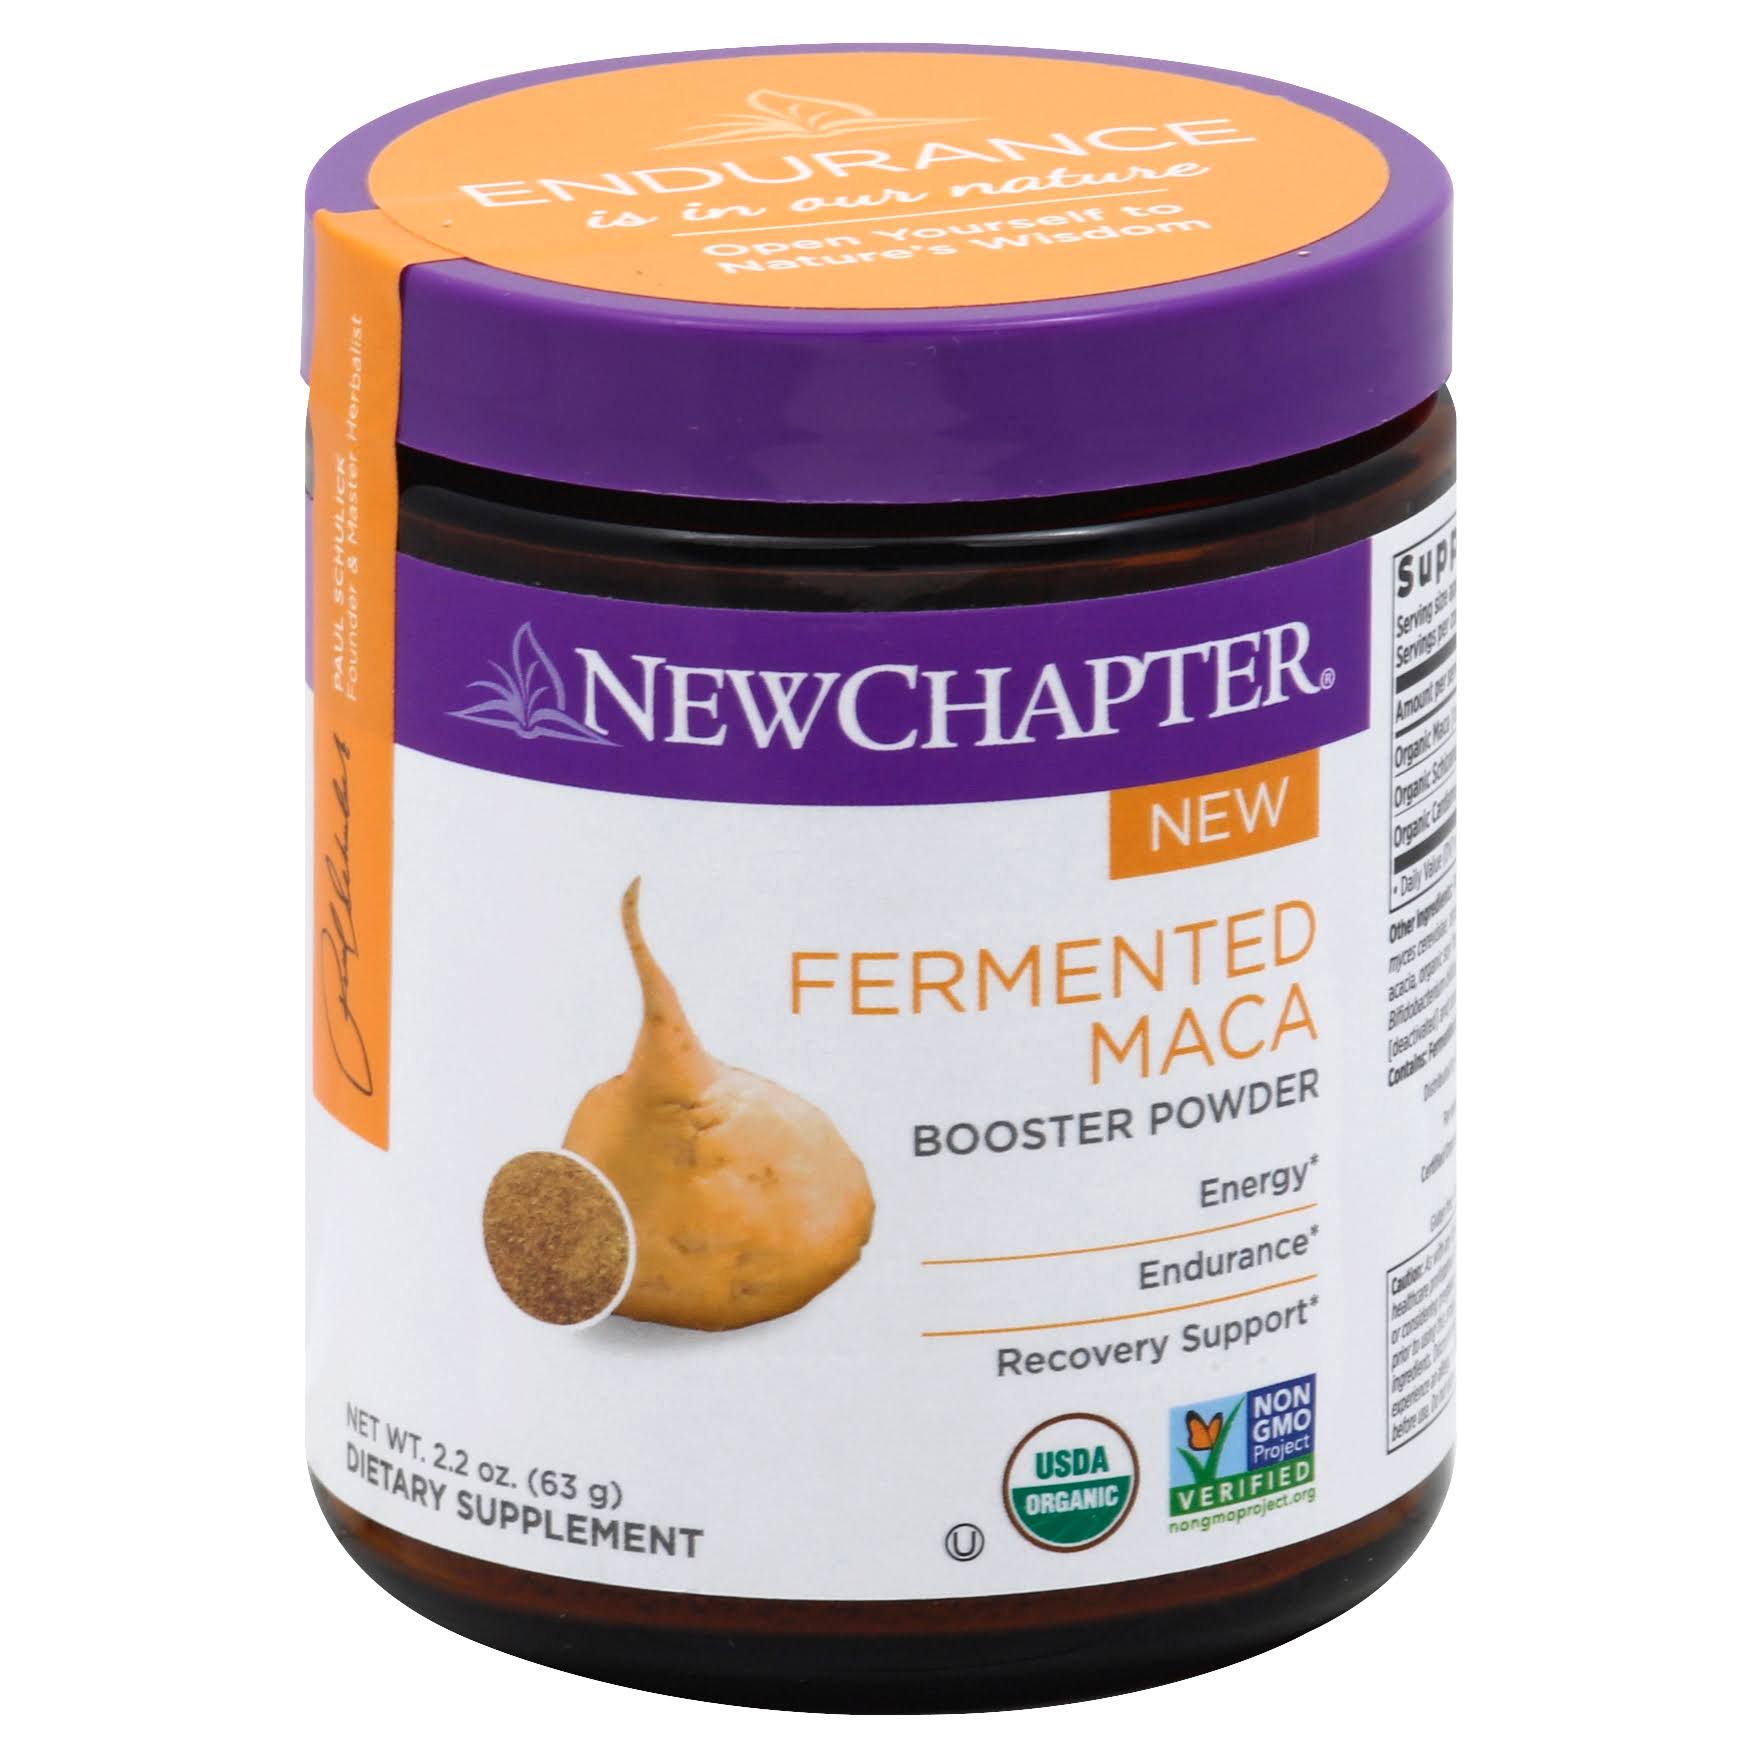 New Chapter Booster Powder, Fermented Maca - 2.2 oz